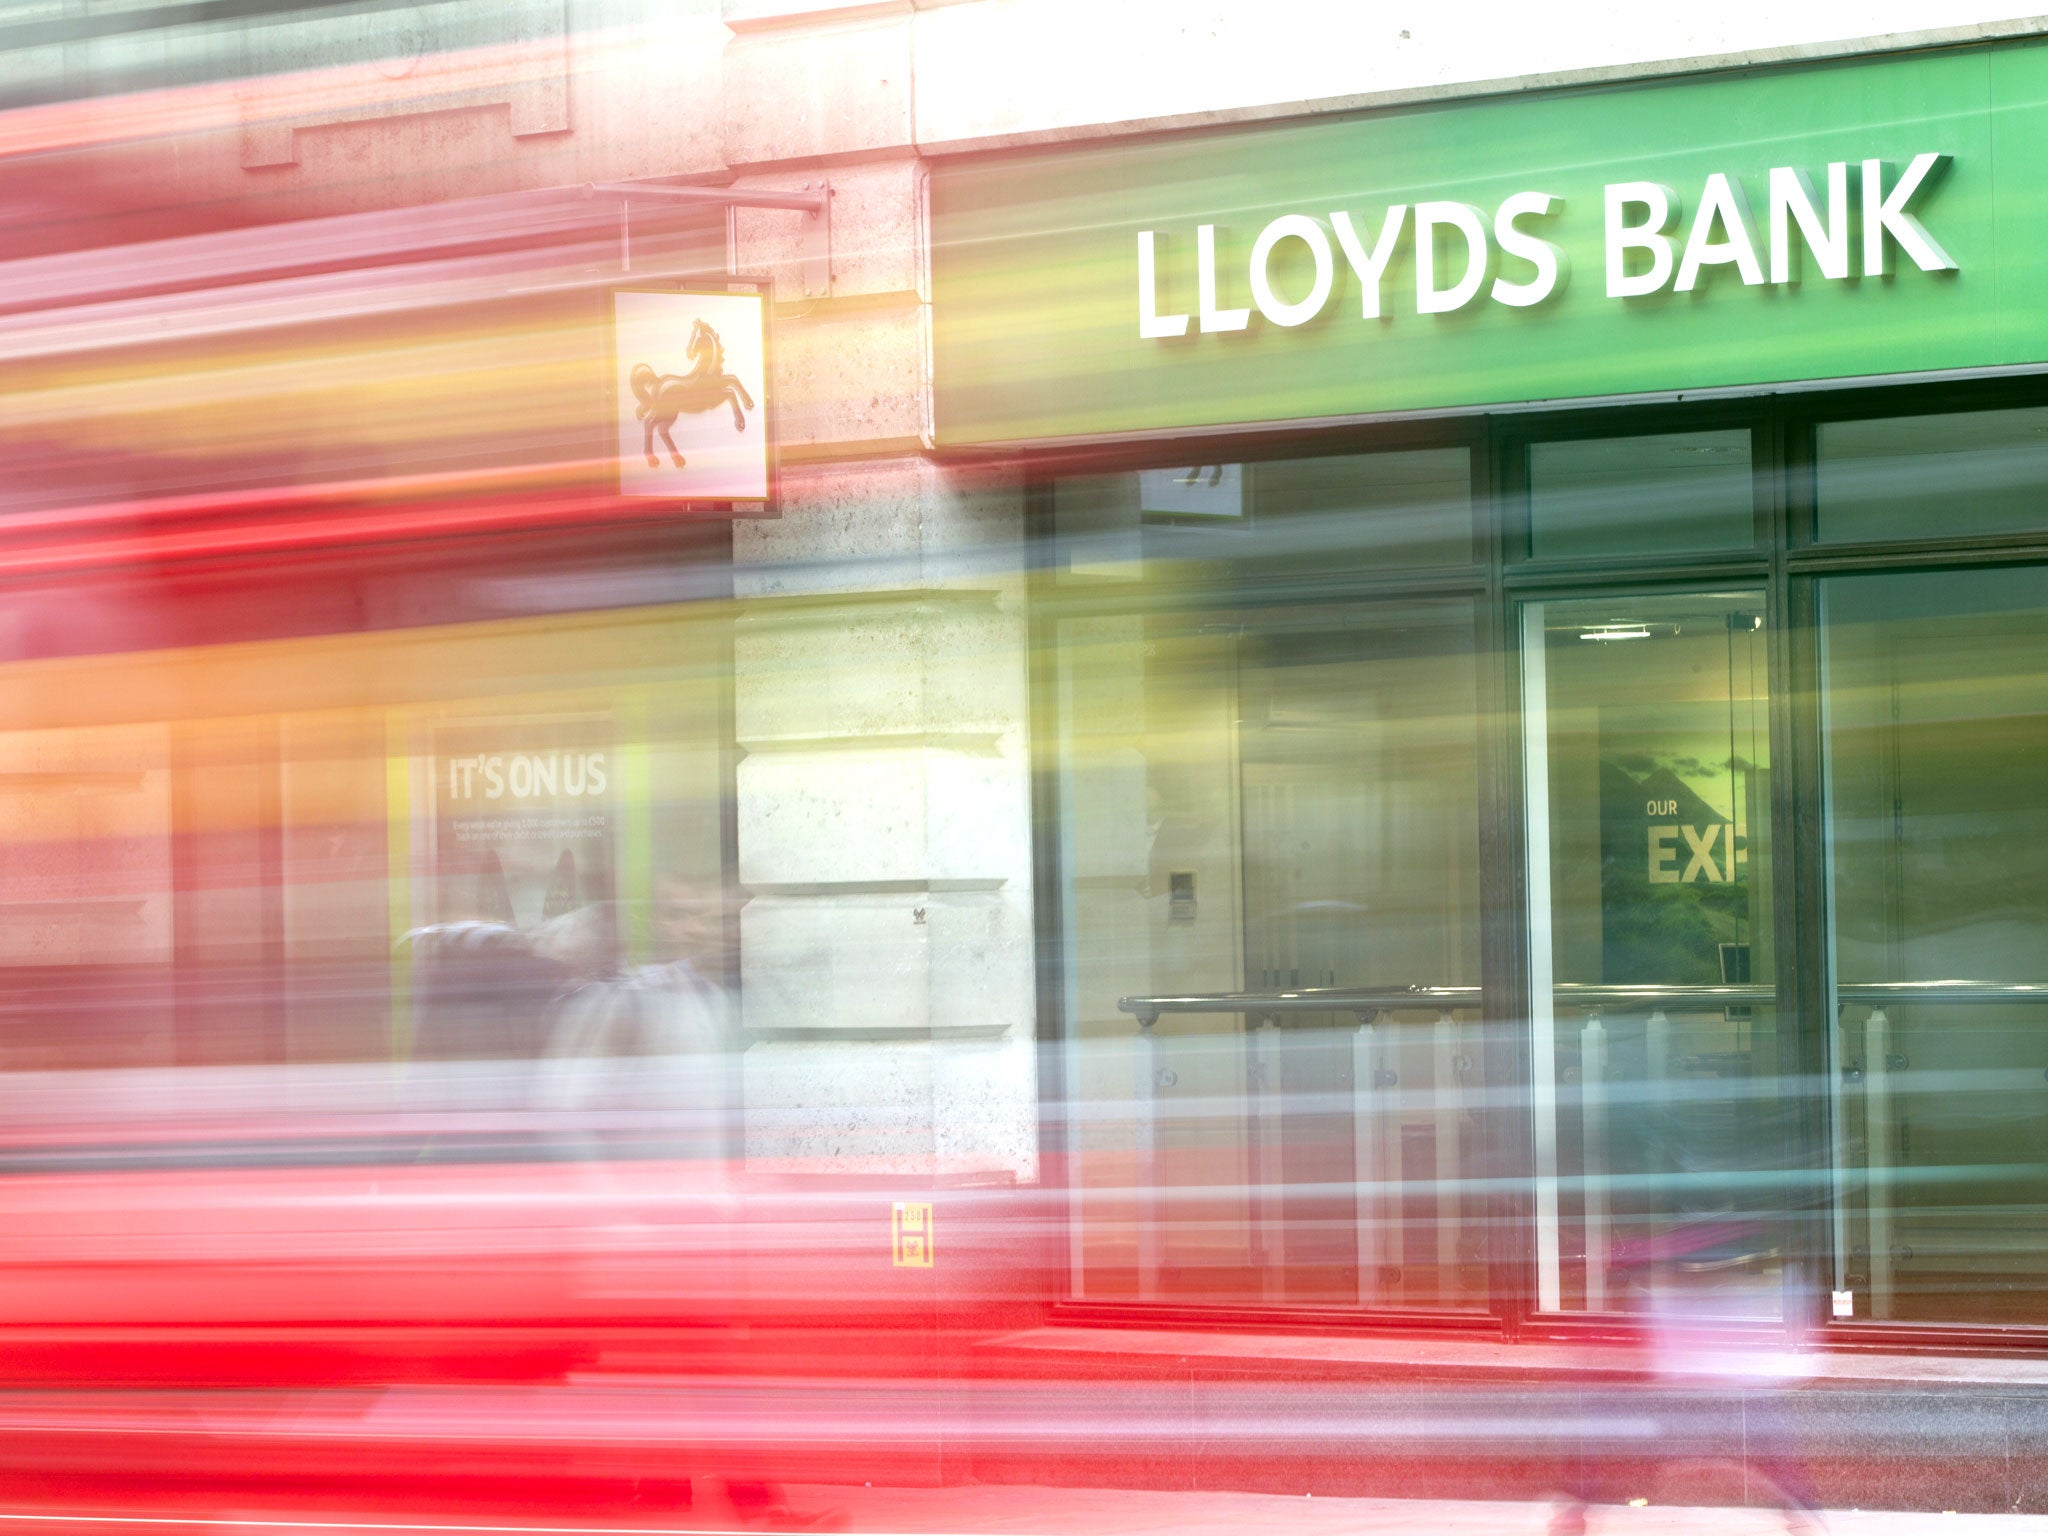 The Unite labor union, which represents some Lloyds employees, said the bank was moving some IT roles to India